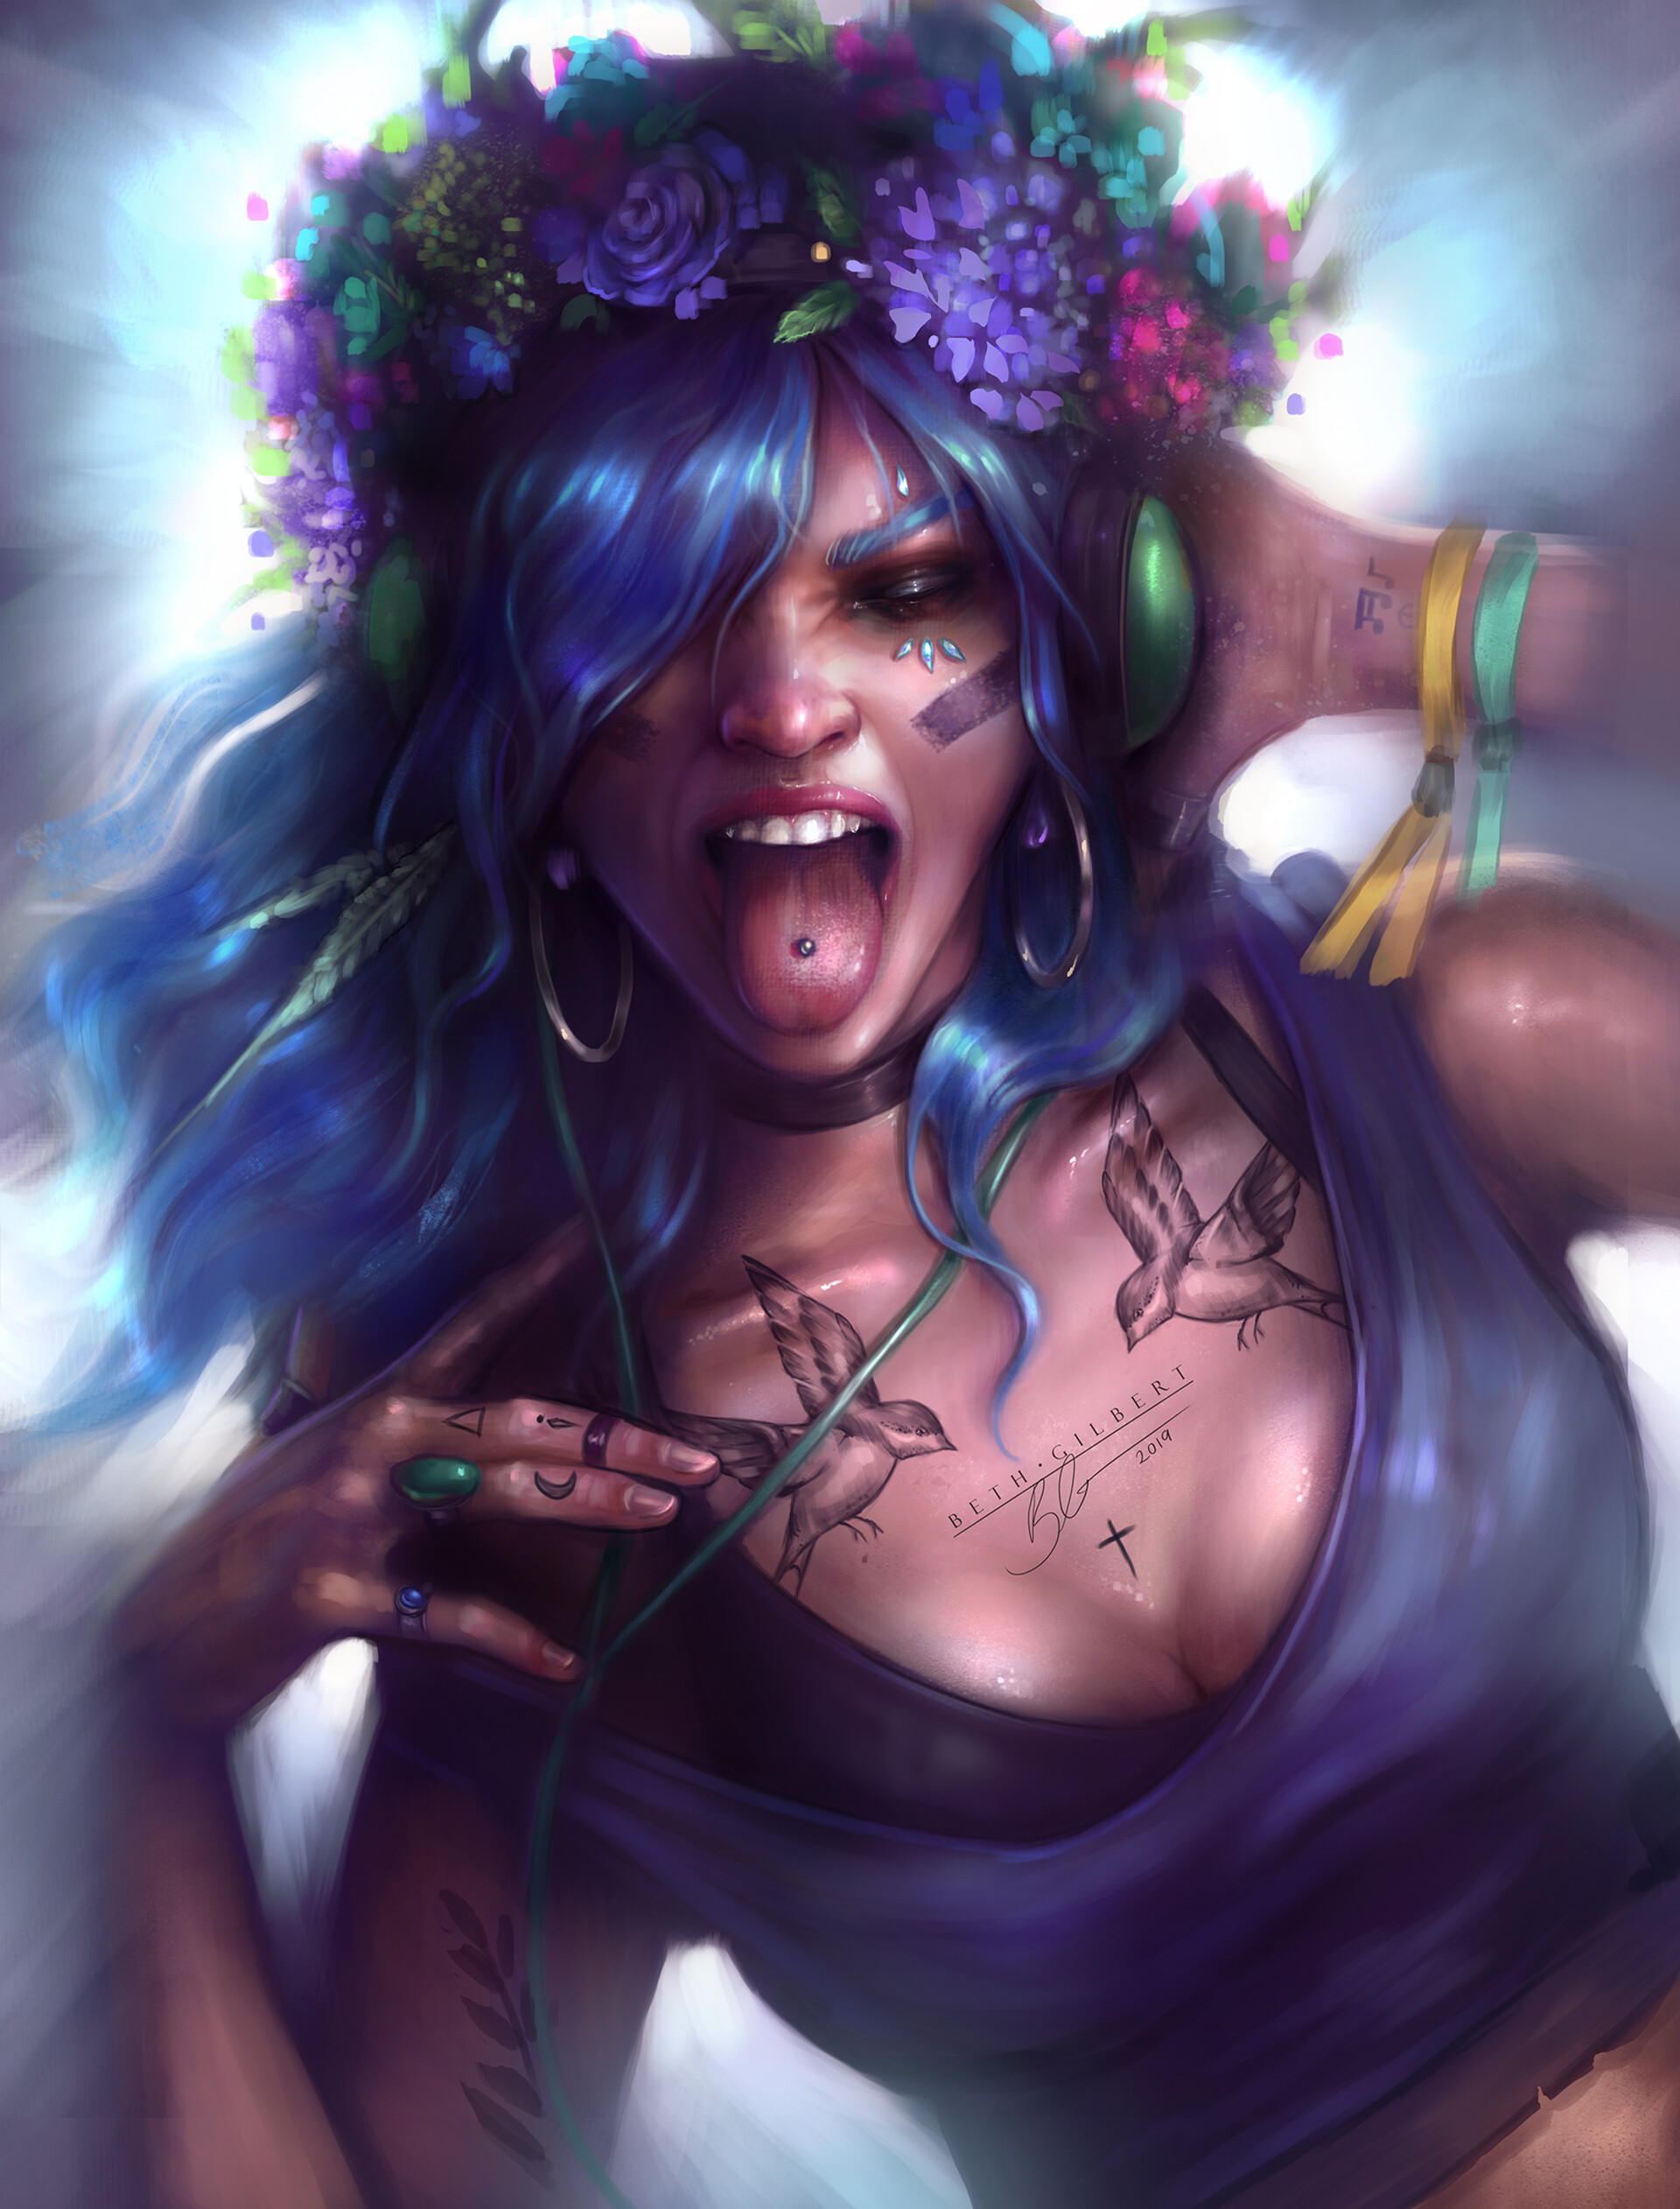 General 1920x2524 Beth Gilbert flower crown tongue out headphones tattoo portrait display blue hair drawing Euphoria ArtStation tongues women hair in face inked girls open mouth boobs cleavage TV series fan art